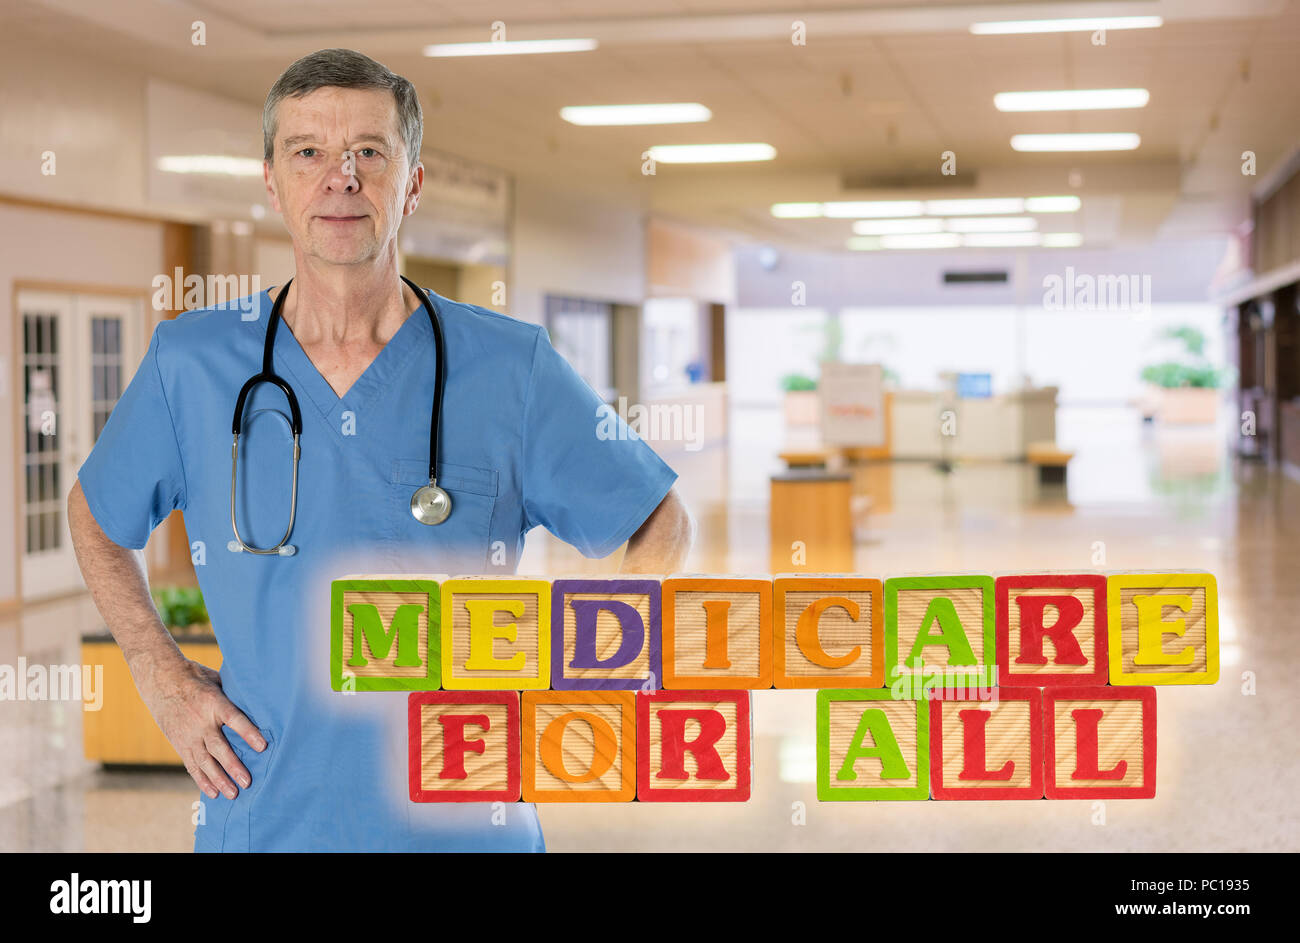 Medicare for All message built from wooden blocks Stock Photo